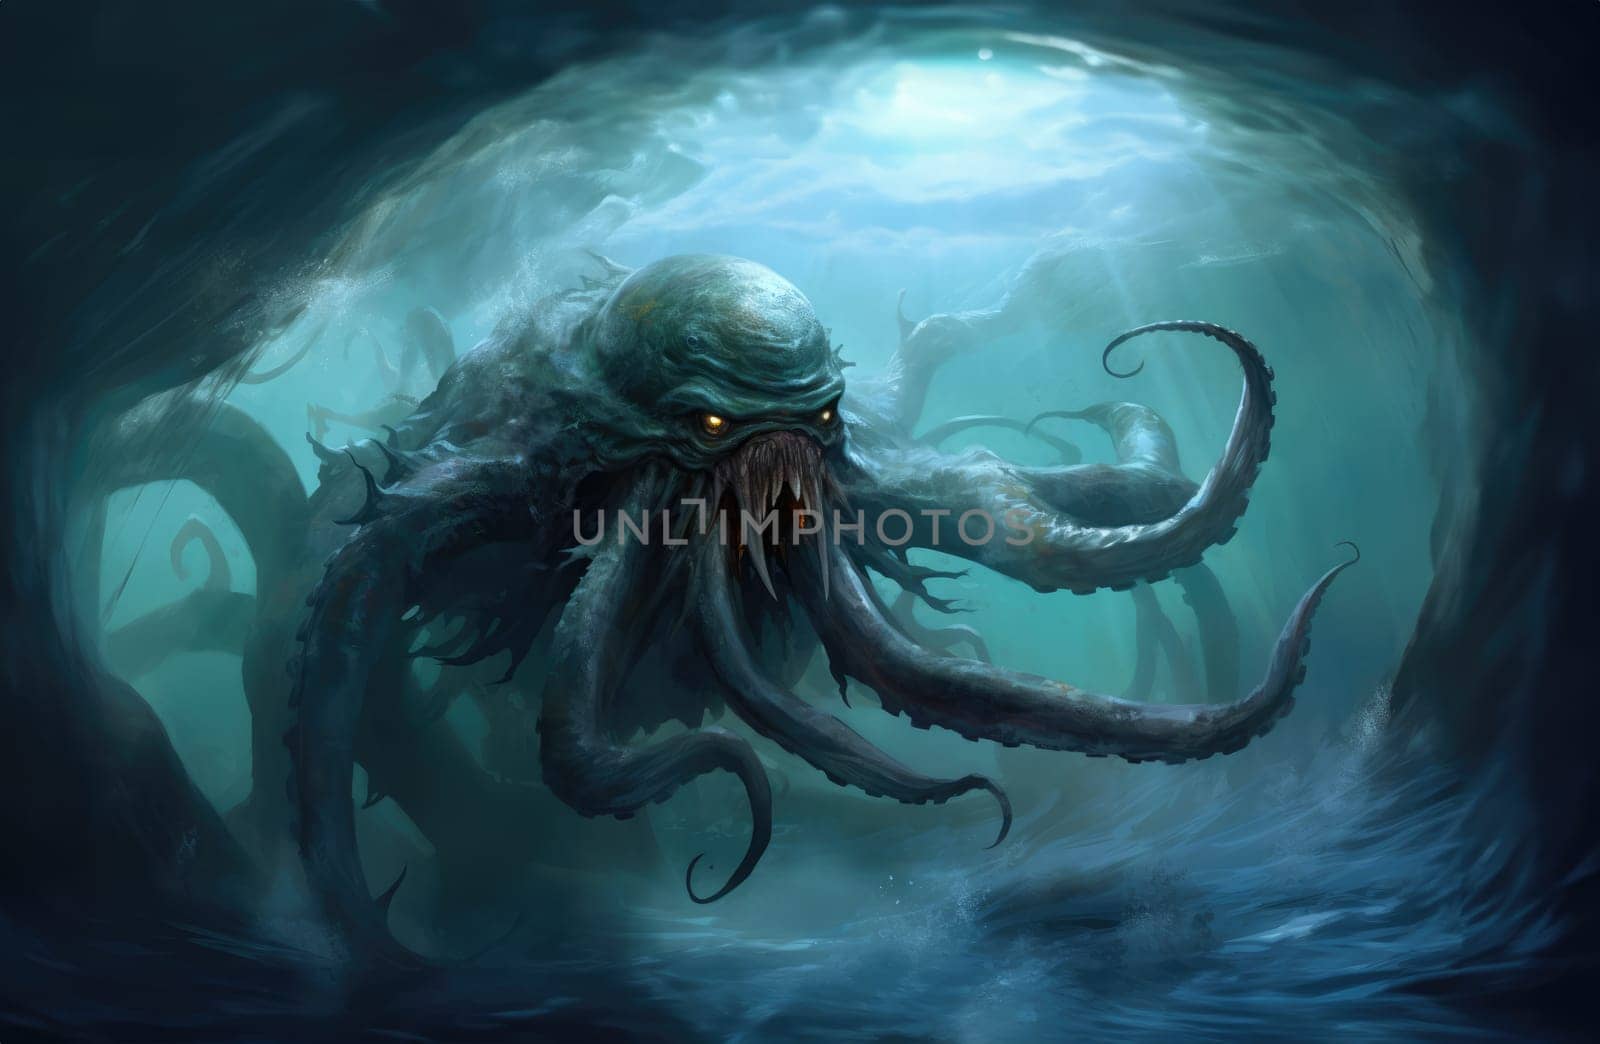 Kraken is a mythological sea monster of gigantic size. A giant octopus that attacks a sea vessel.